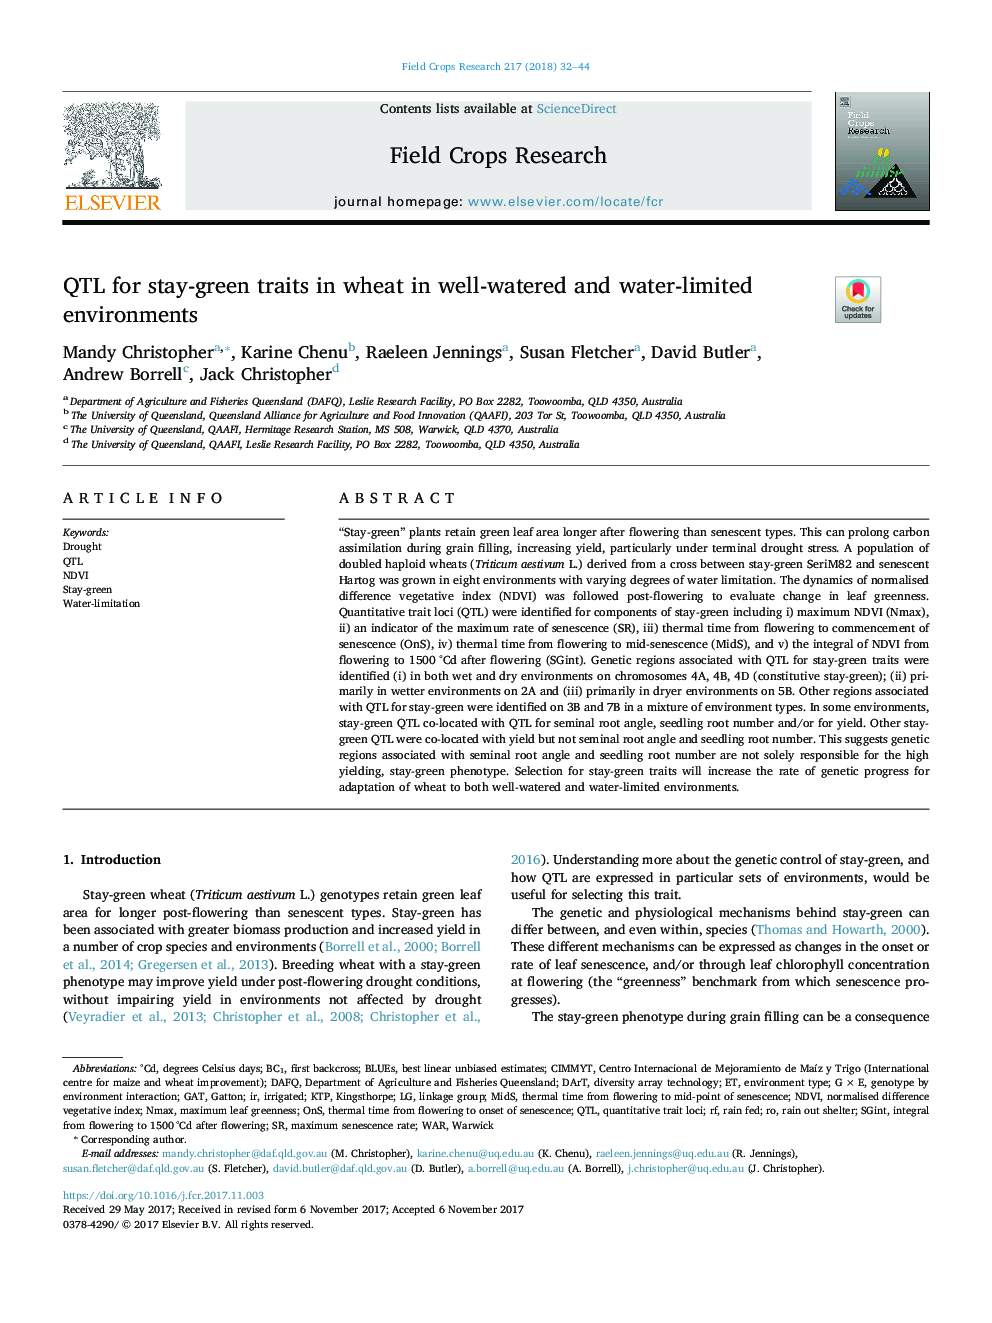 QTL for stay-green traits in wheat in well-watered and water-limited environments